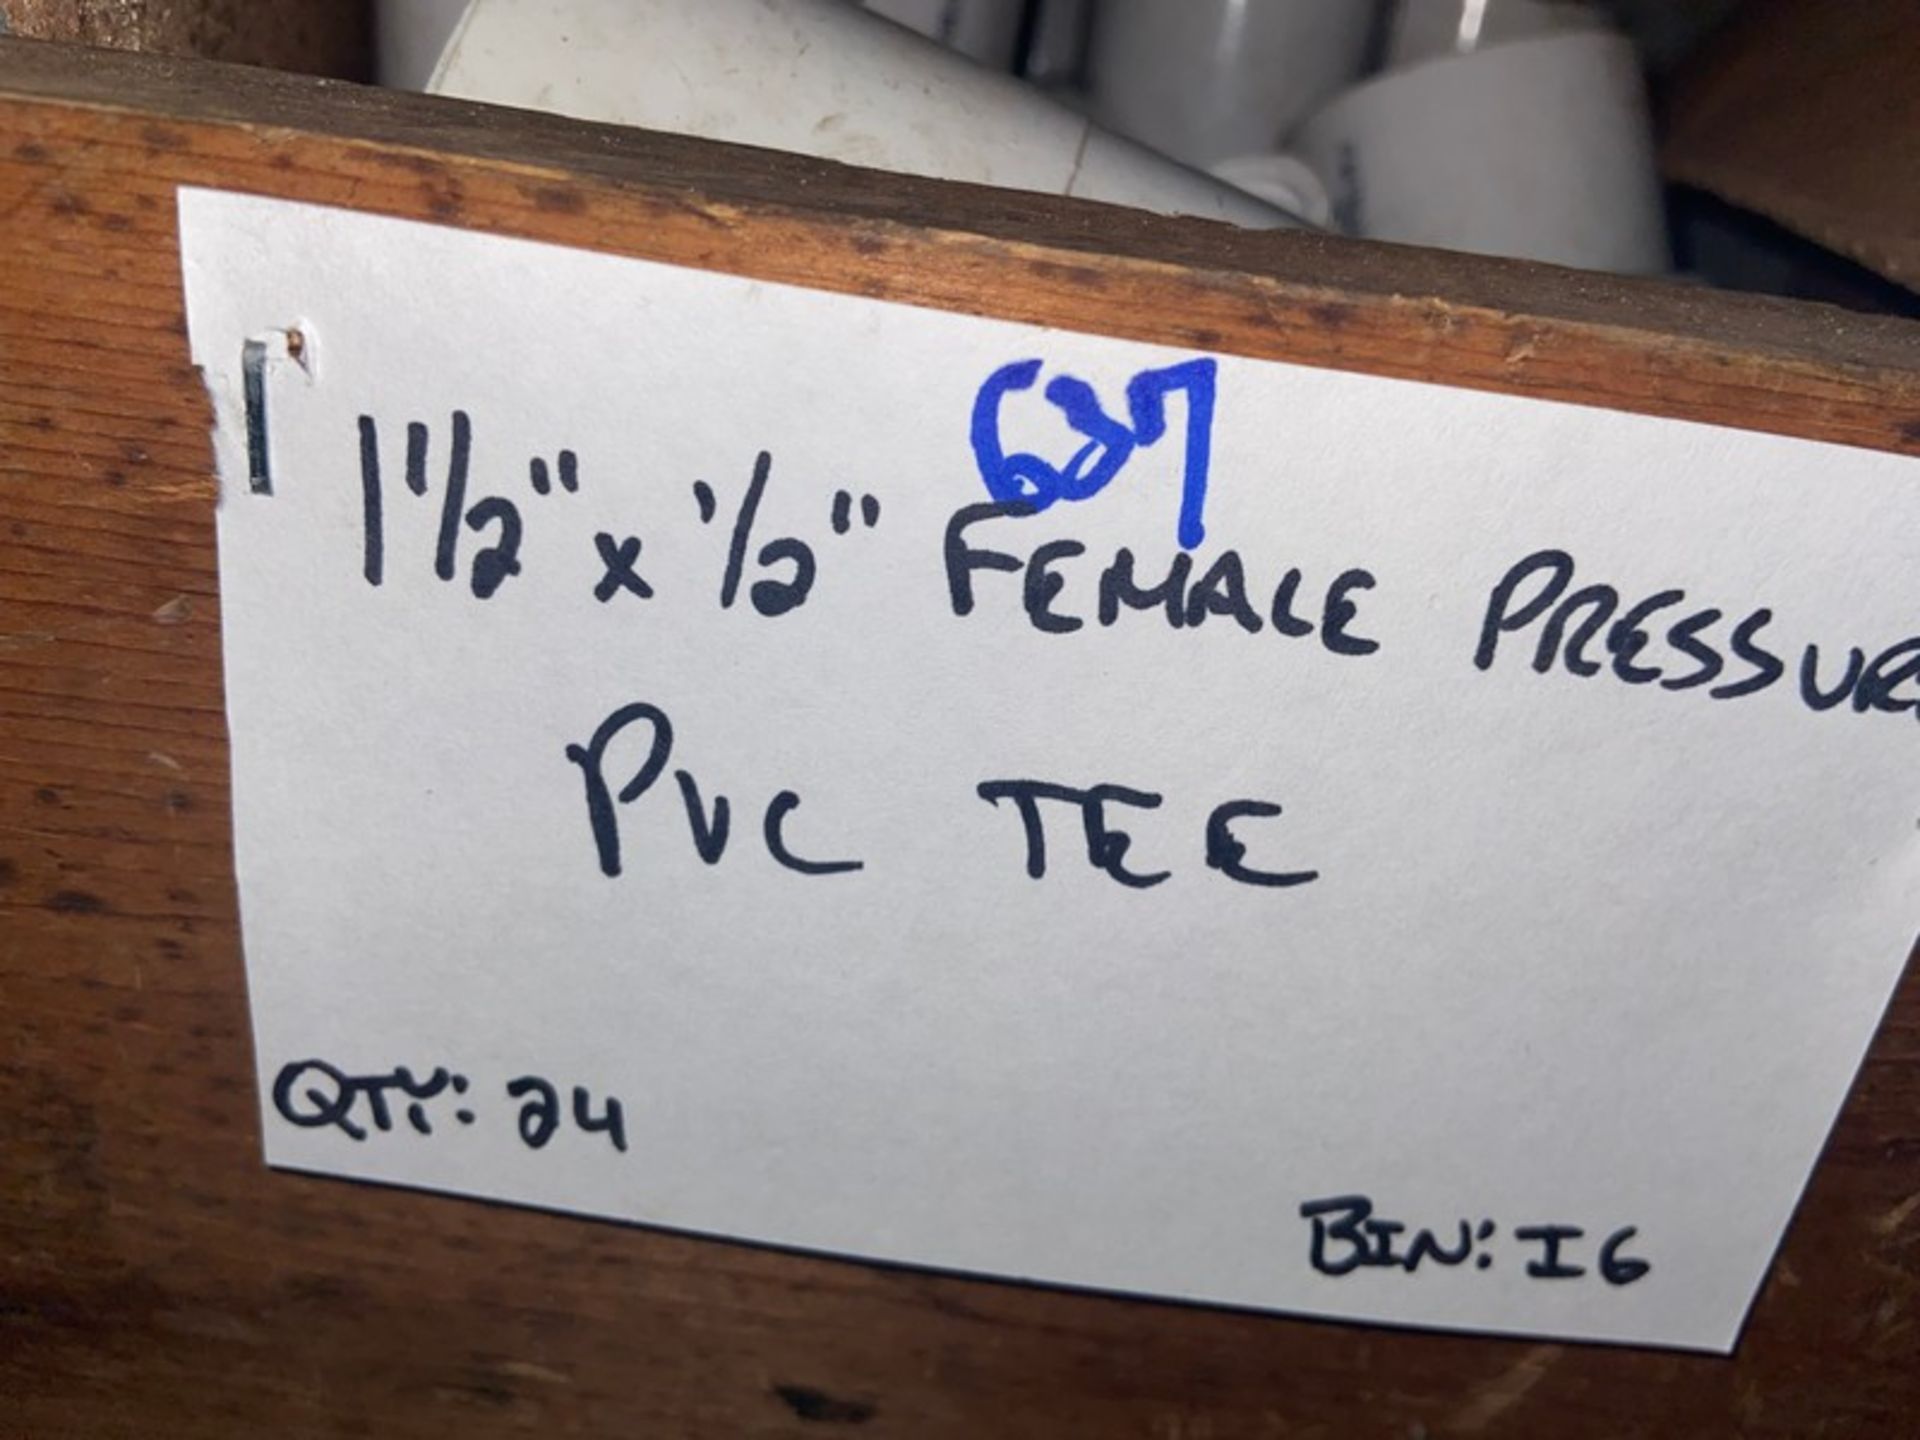 (24) 1 1/2” x 1/2” Female Pressure PVC TEE(Bin:I6) (LOCATED IN MONROEVILLE, PA) - Image 4 of 4